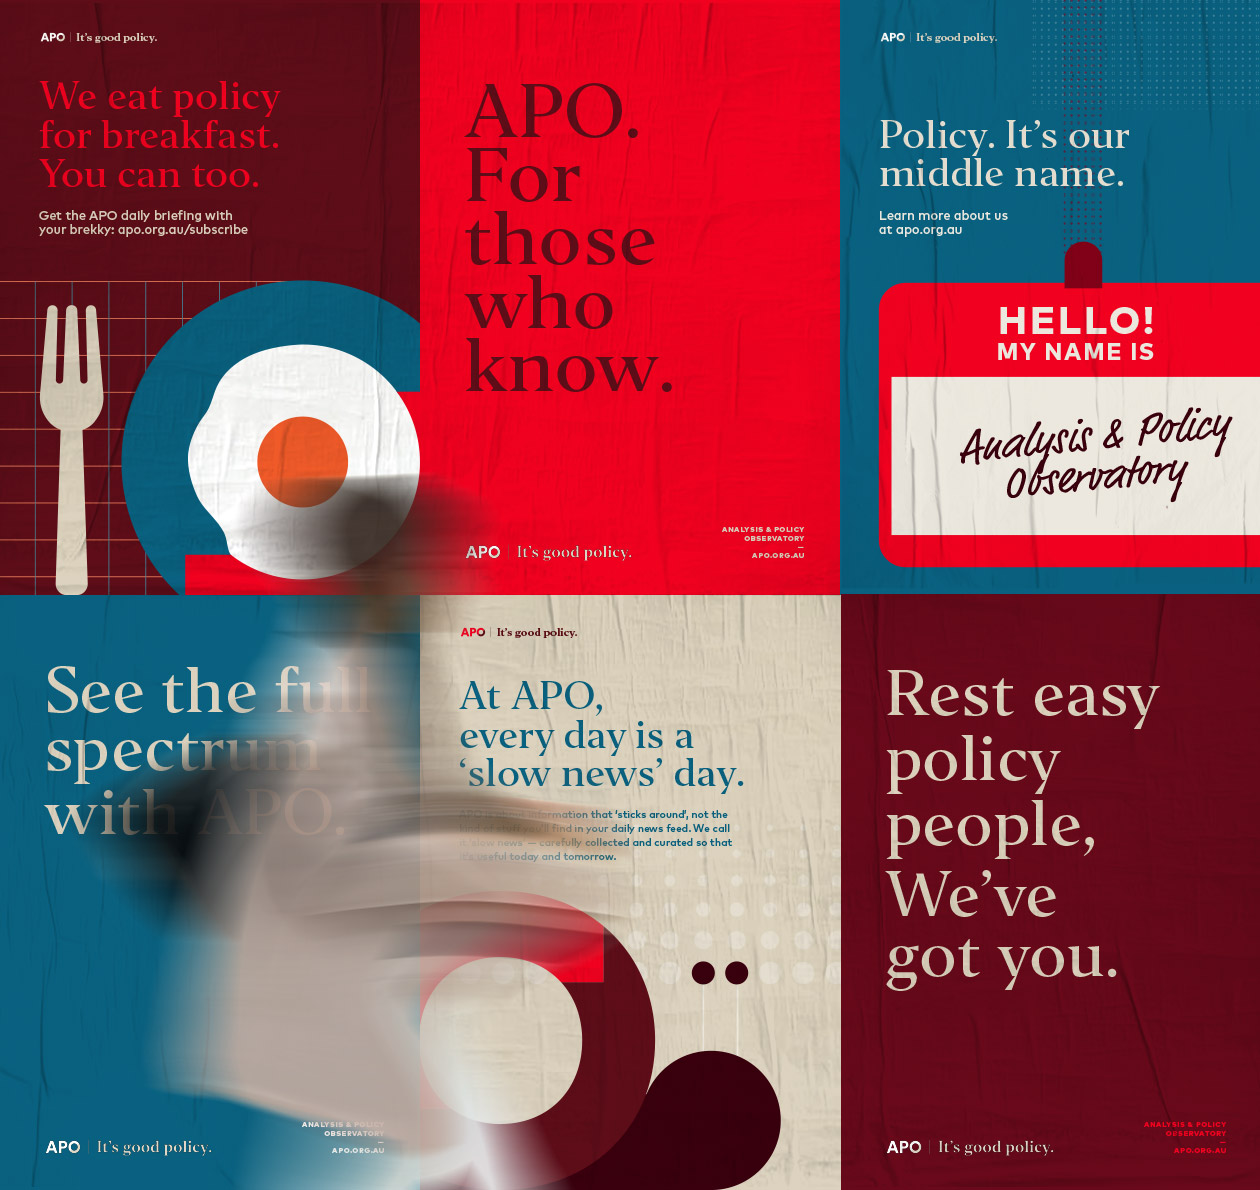 Set of 6 APO posters with brand messaging in a street setting with a person walking past.